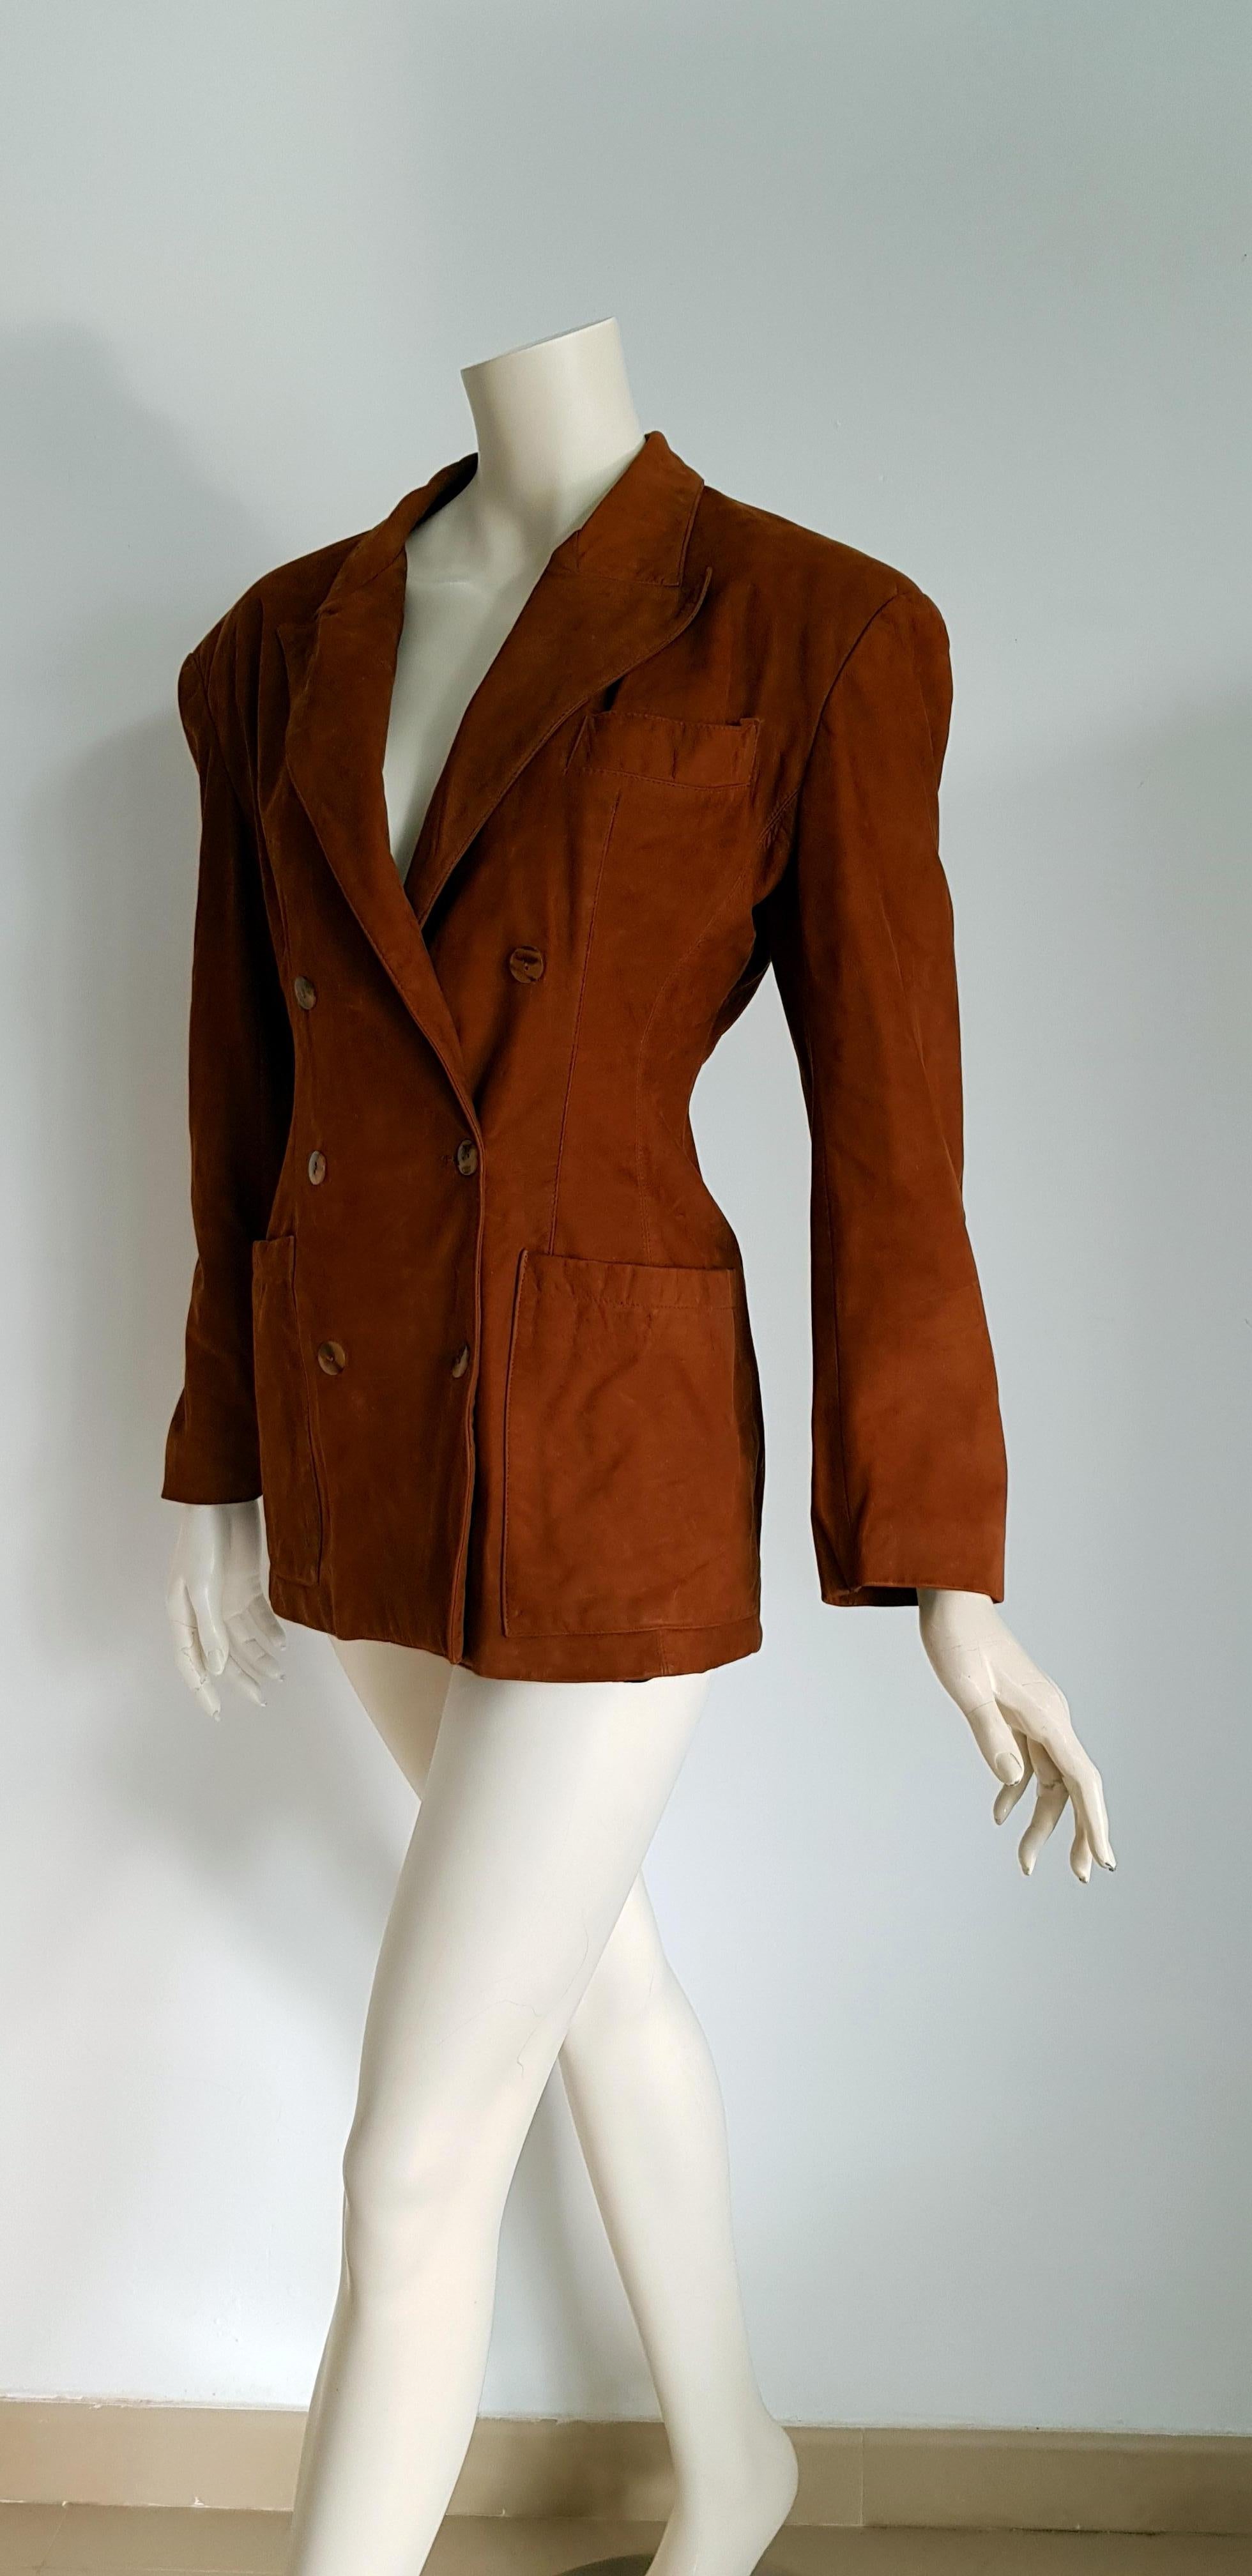 Jean Paul GAULTIER brown suede double breasted silk lined jacket - Unworn, New
..
SIZE: equivalent to about Small / Medium, please review approx measurements as follows in cm: lenght 78, chest underarm to underarm 53, bust circumference 95, shoulder